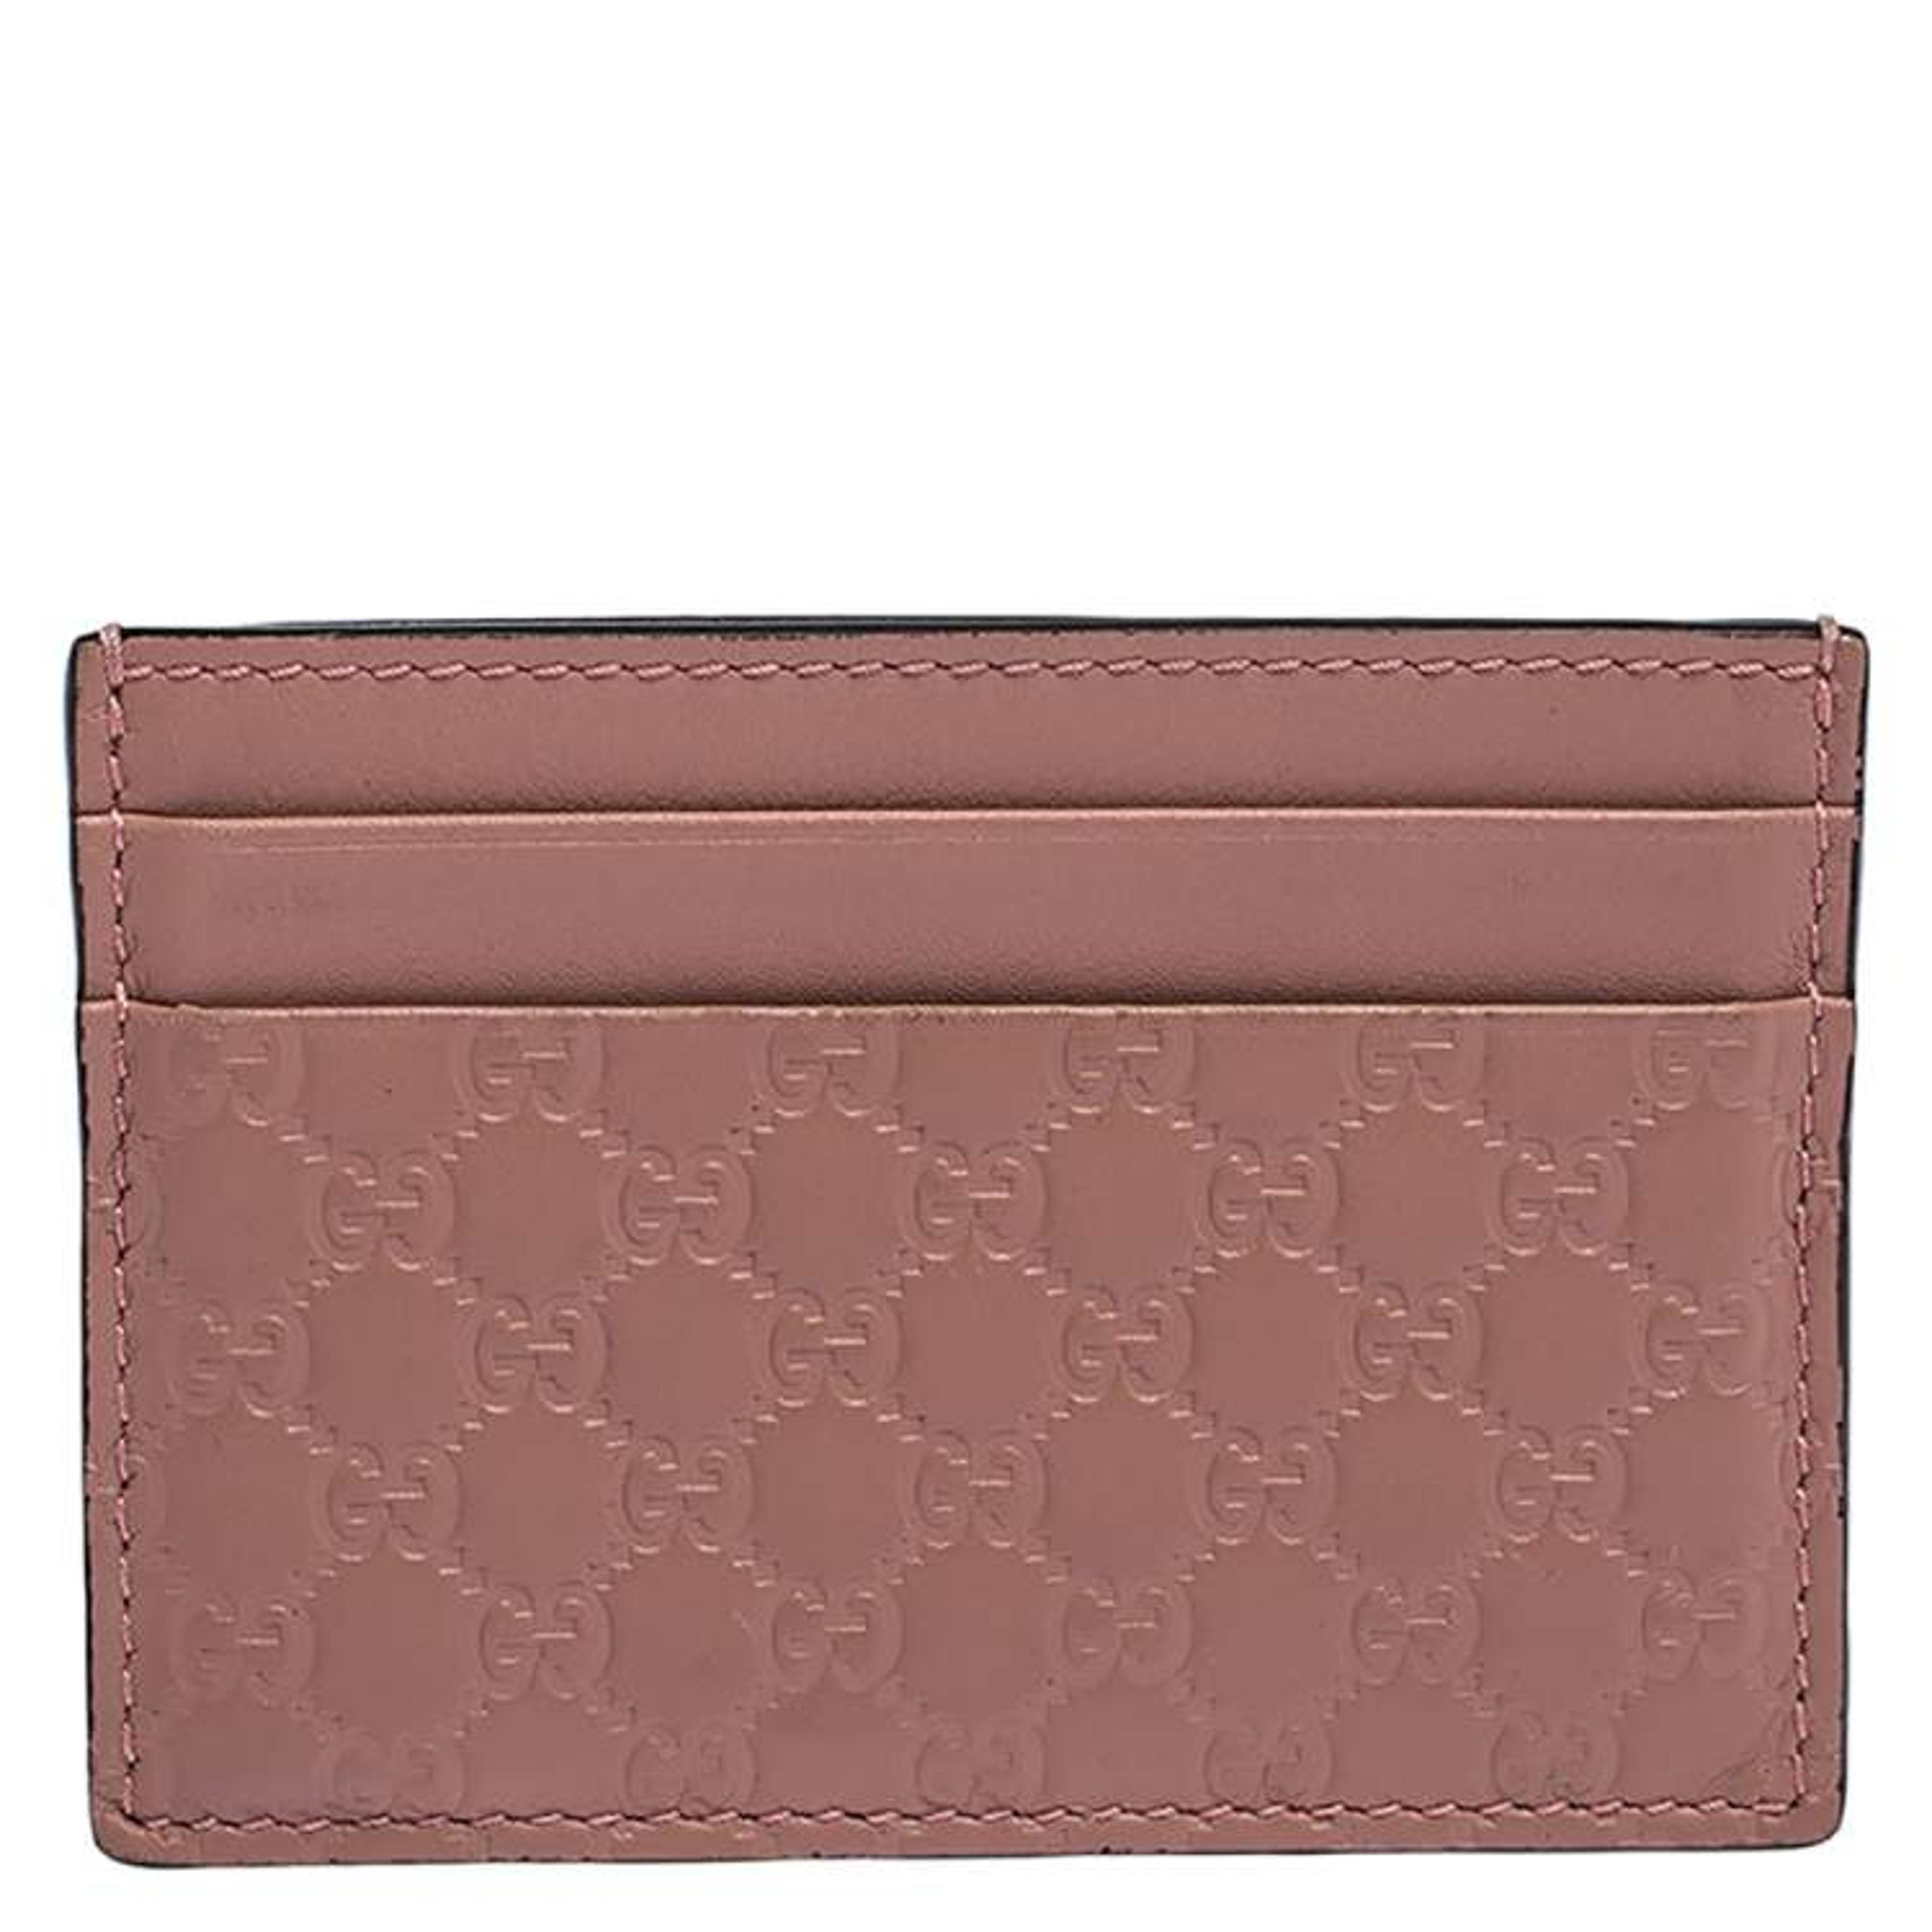 Gucci Pink Microguccissima Leather Card Holder